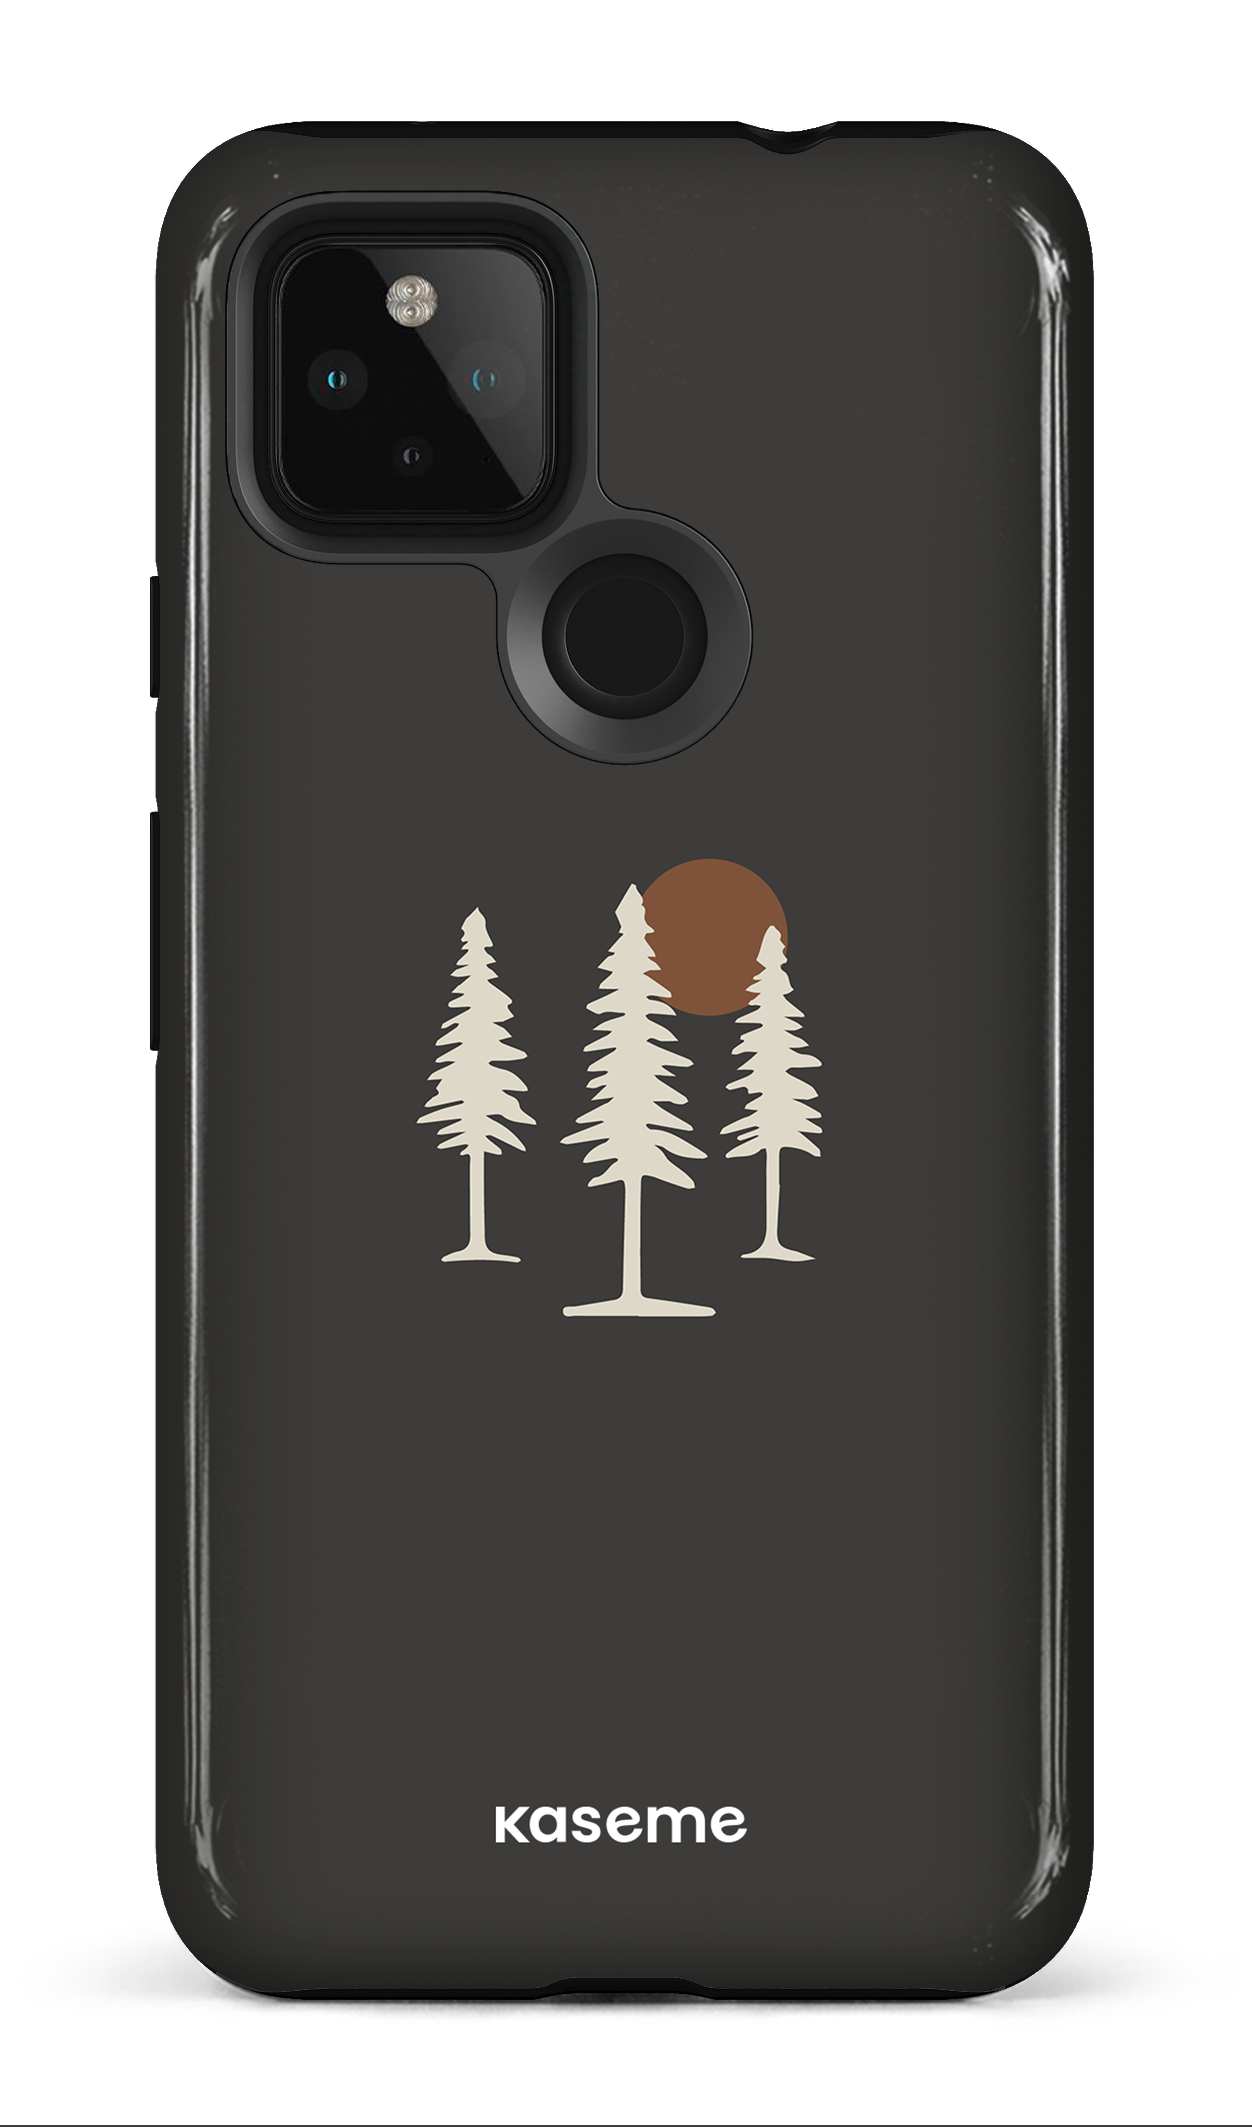 The Great Woods - Google Pixel 4A (5G)